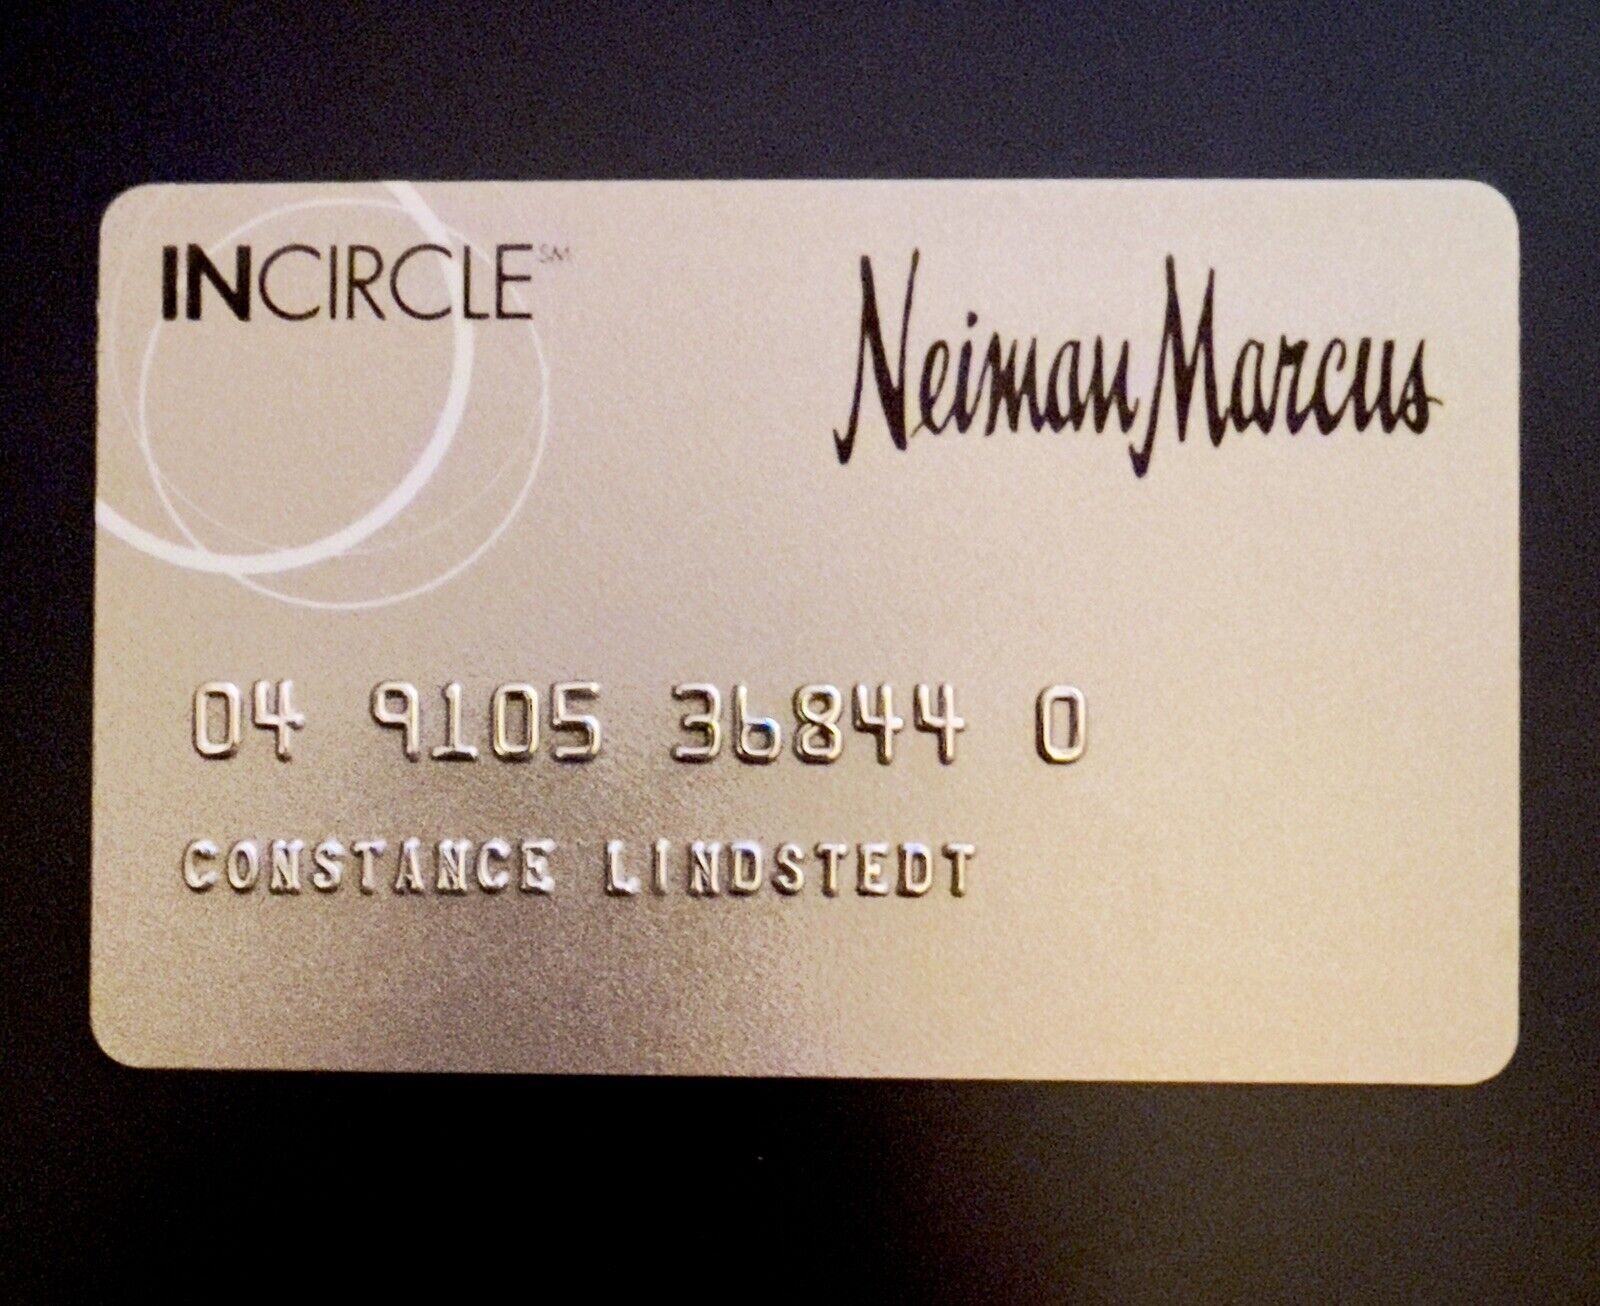 How To Get Approved For Neiman Marcus Credit Card